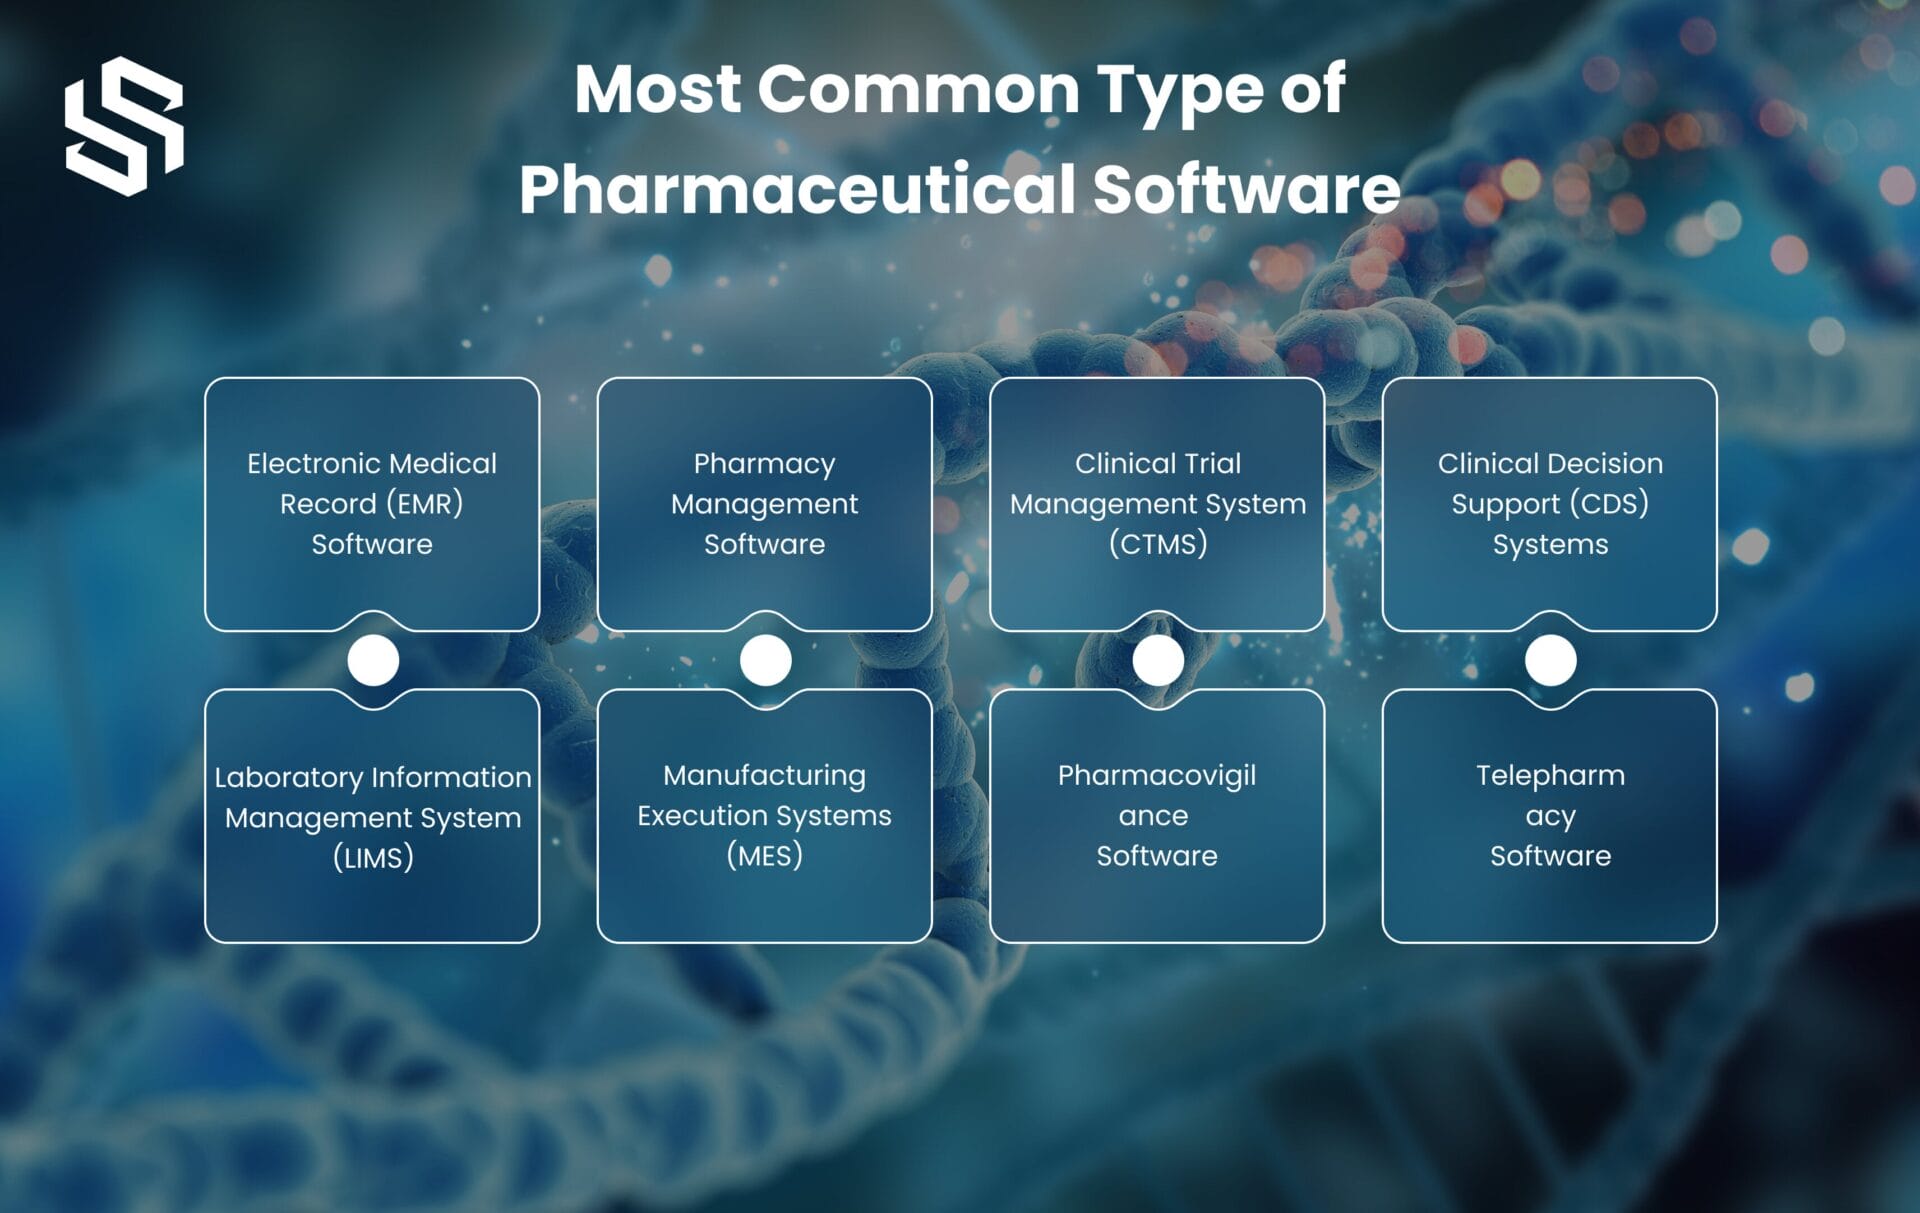 Most Common Type of Pharmaceutical Software